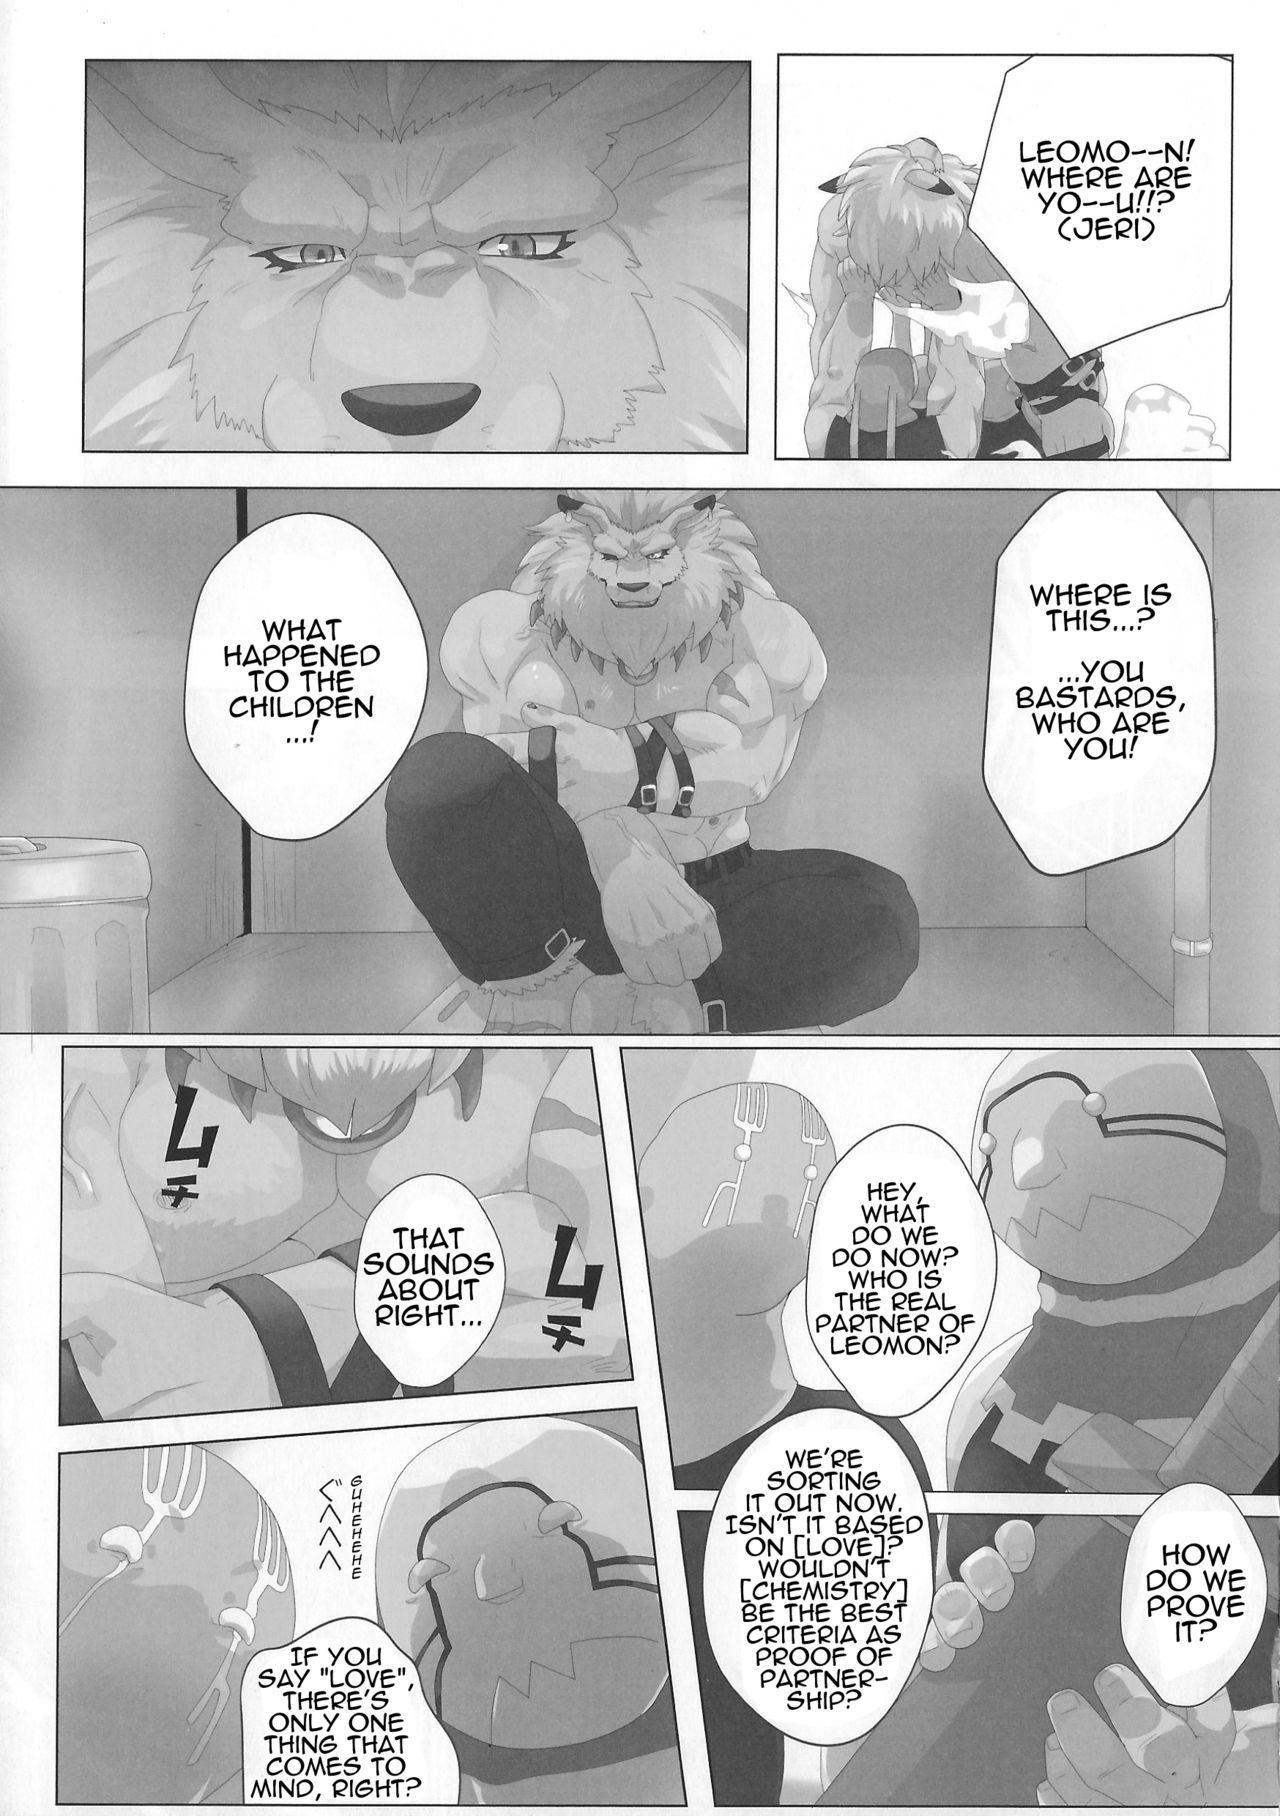 [Debirobu] For the Lion-Man Type Electric Life Form to Overturn Fate - Leomon Doujin [ENG] 6